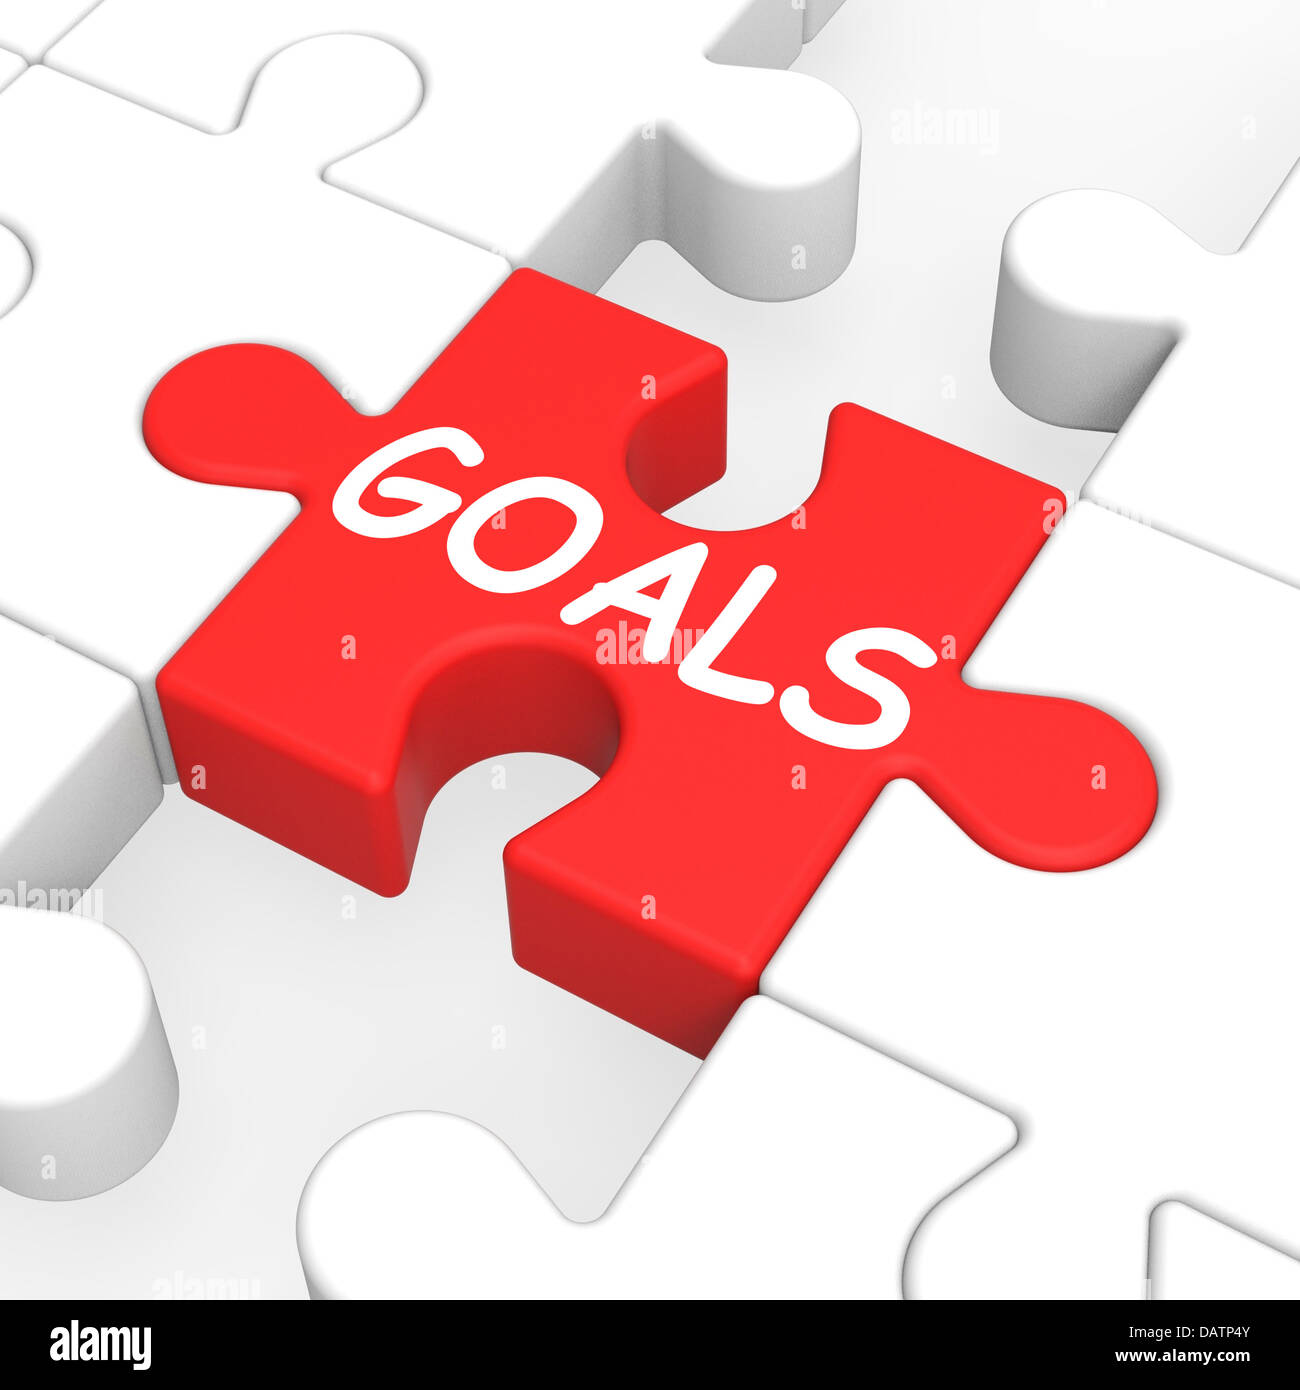 Goals Puzzle Showing Aspiration Targets Stock Photo